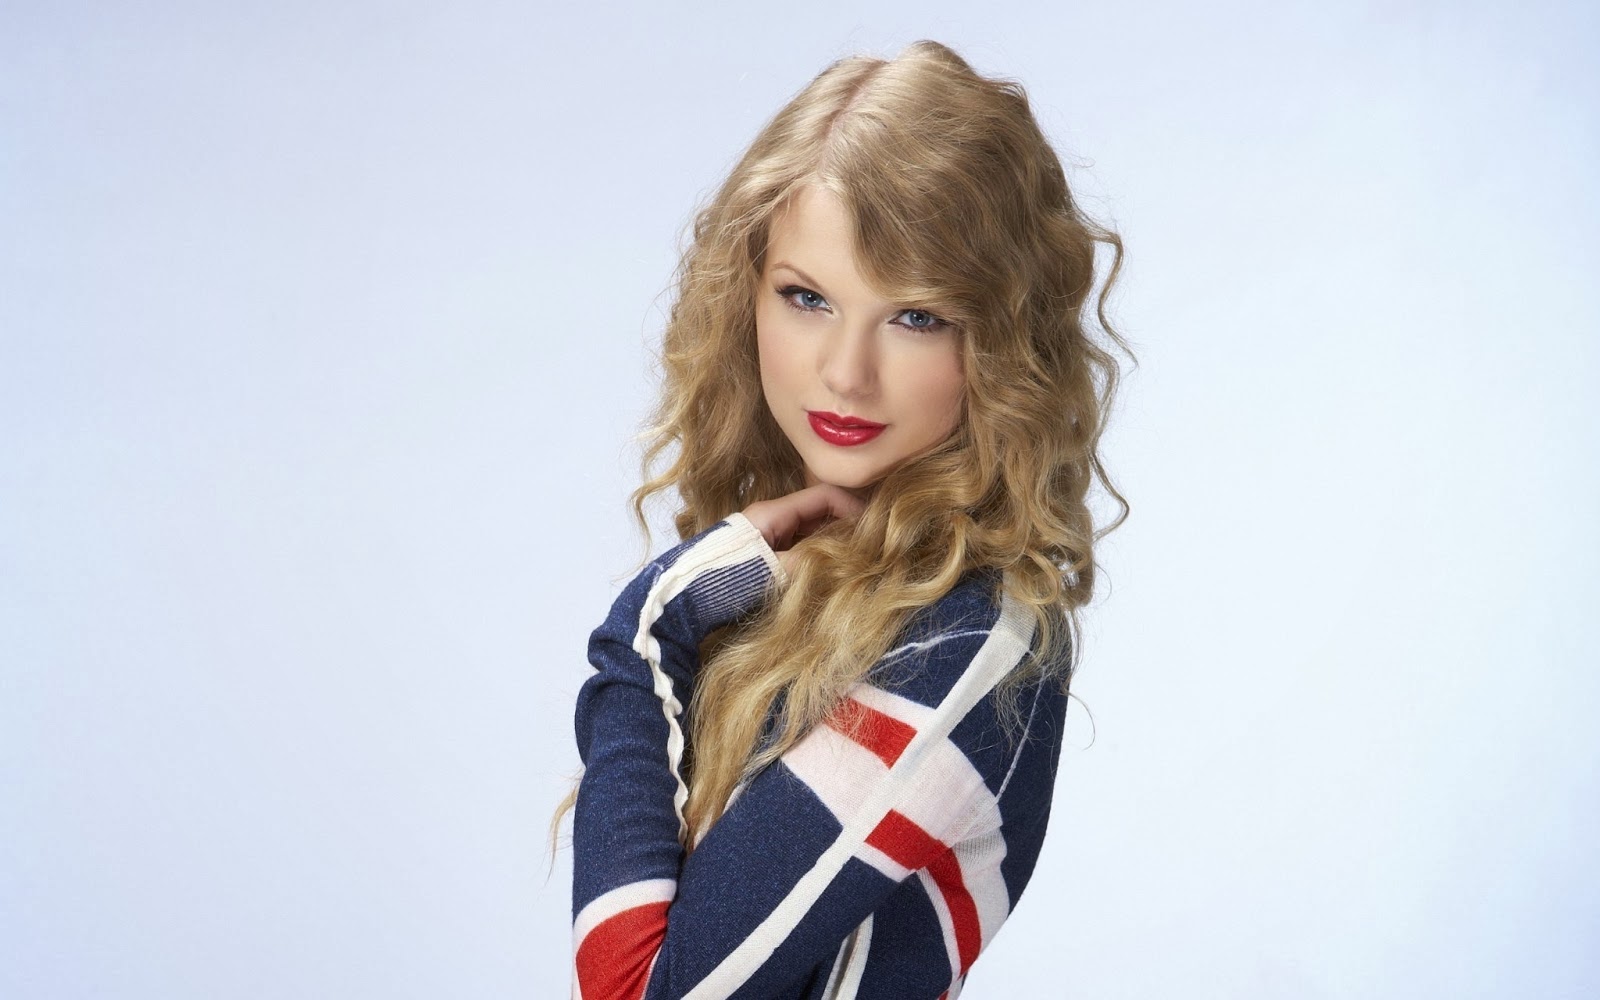 All new wallpaper : Taylor Swift Latest Lovely HD Wallpapers 2013-14